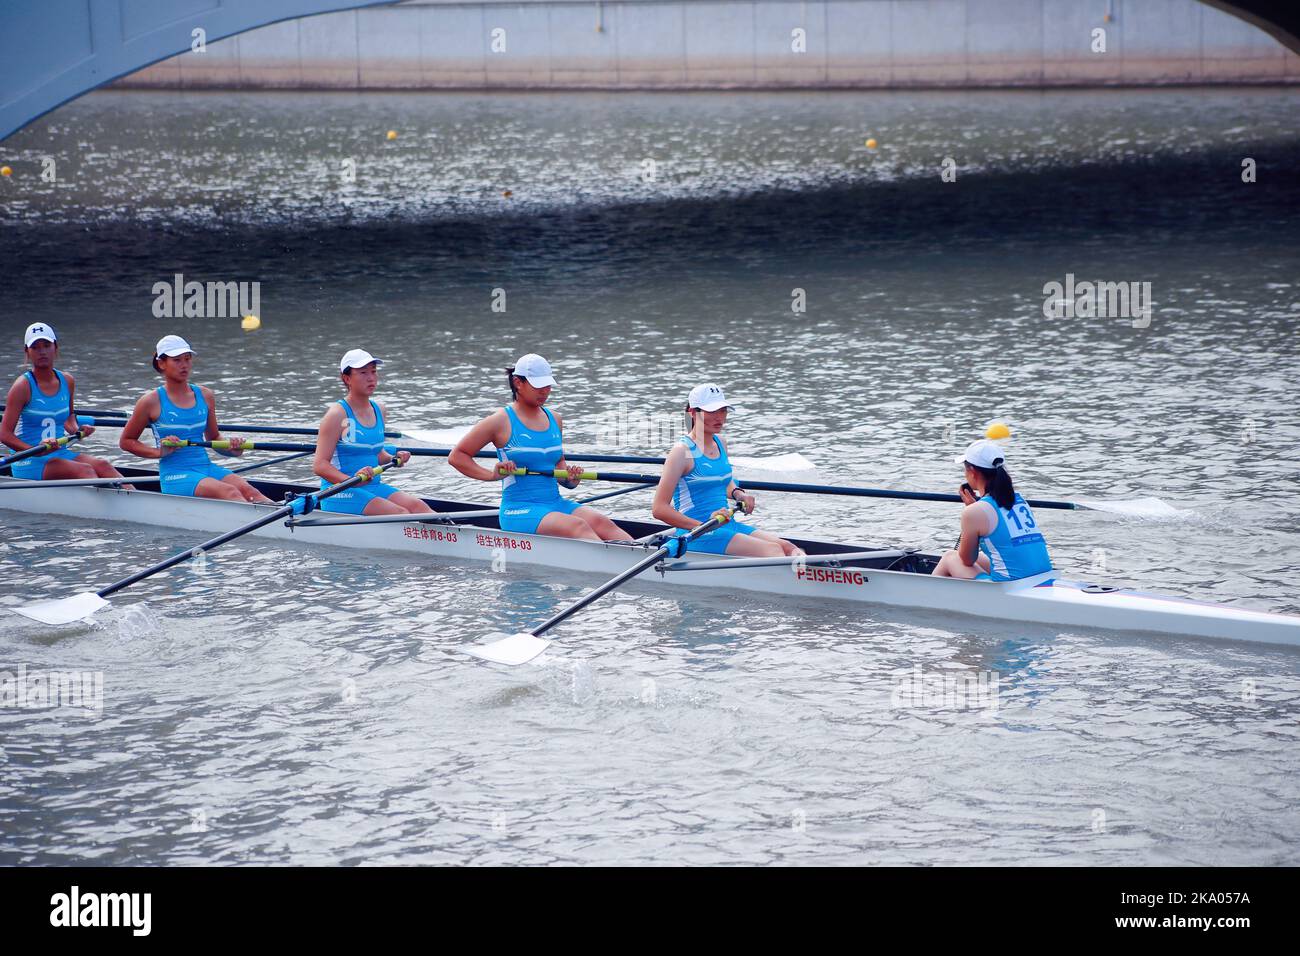 SHANGHAI, CHINA - OCTOBER 30, 2022 - A view of the 2022 Shanghai Open Rowing competition on the Suzhou River in Shanghai, China, Oct 30, 2022. The com Stock Photo